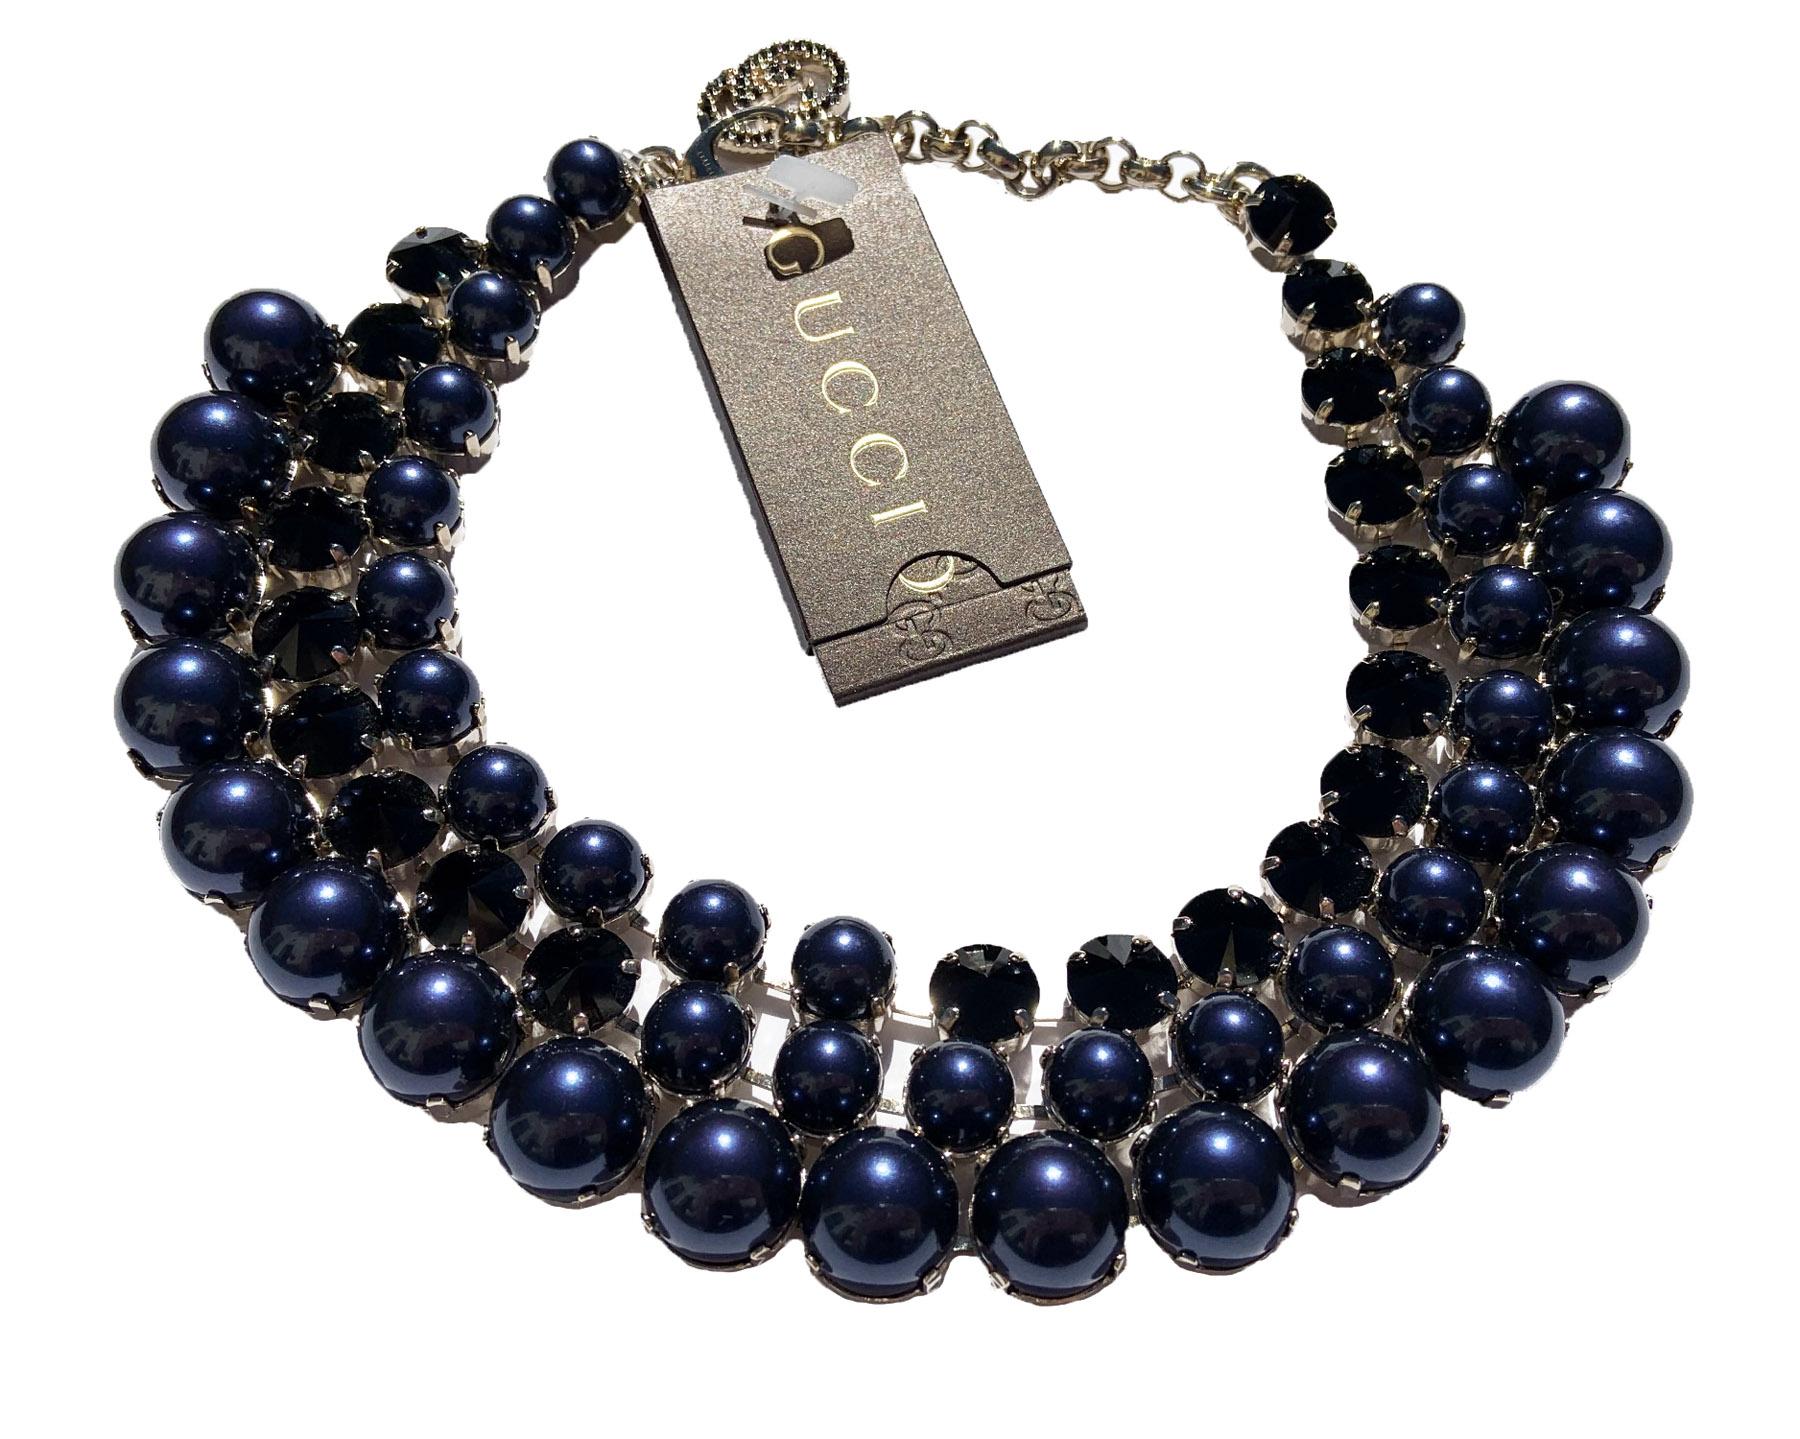 New Gucci Navy Blue and Black Necklace
Intricately Crafted with Blue Pearl Effect Glass and Black Swarovski Crystals.
Adjustable Lobster Clasp Closure with Crystal Interlocking G Detail.
Gold-tone Metal Hardware, Engraved *Gucci* Brand on Back.